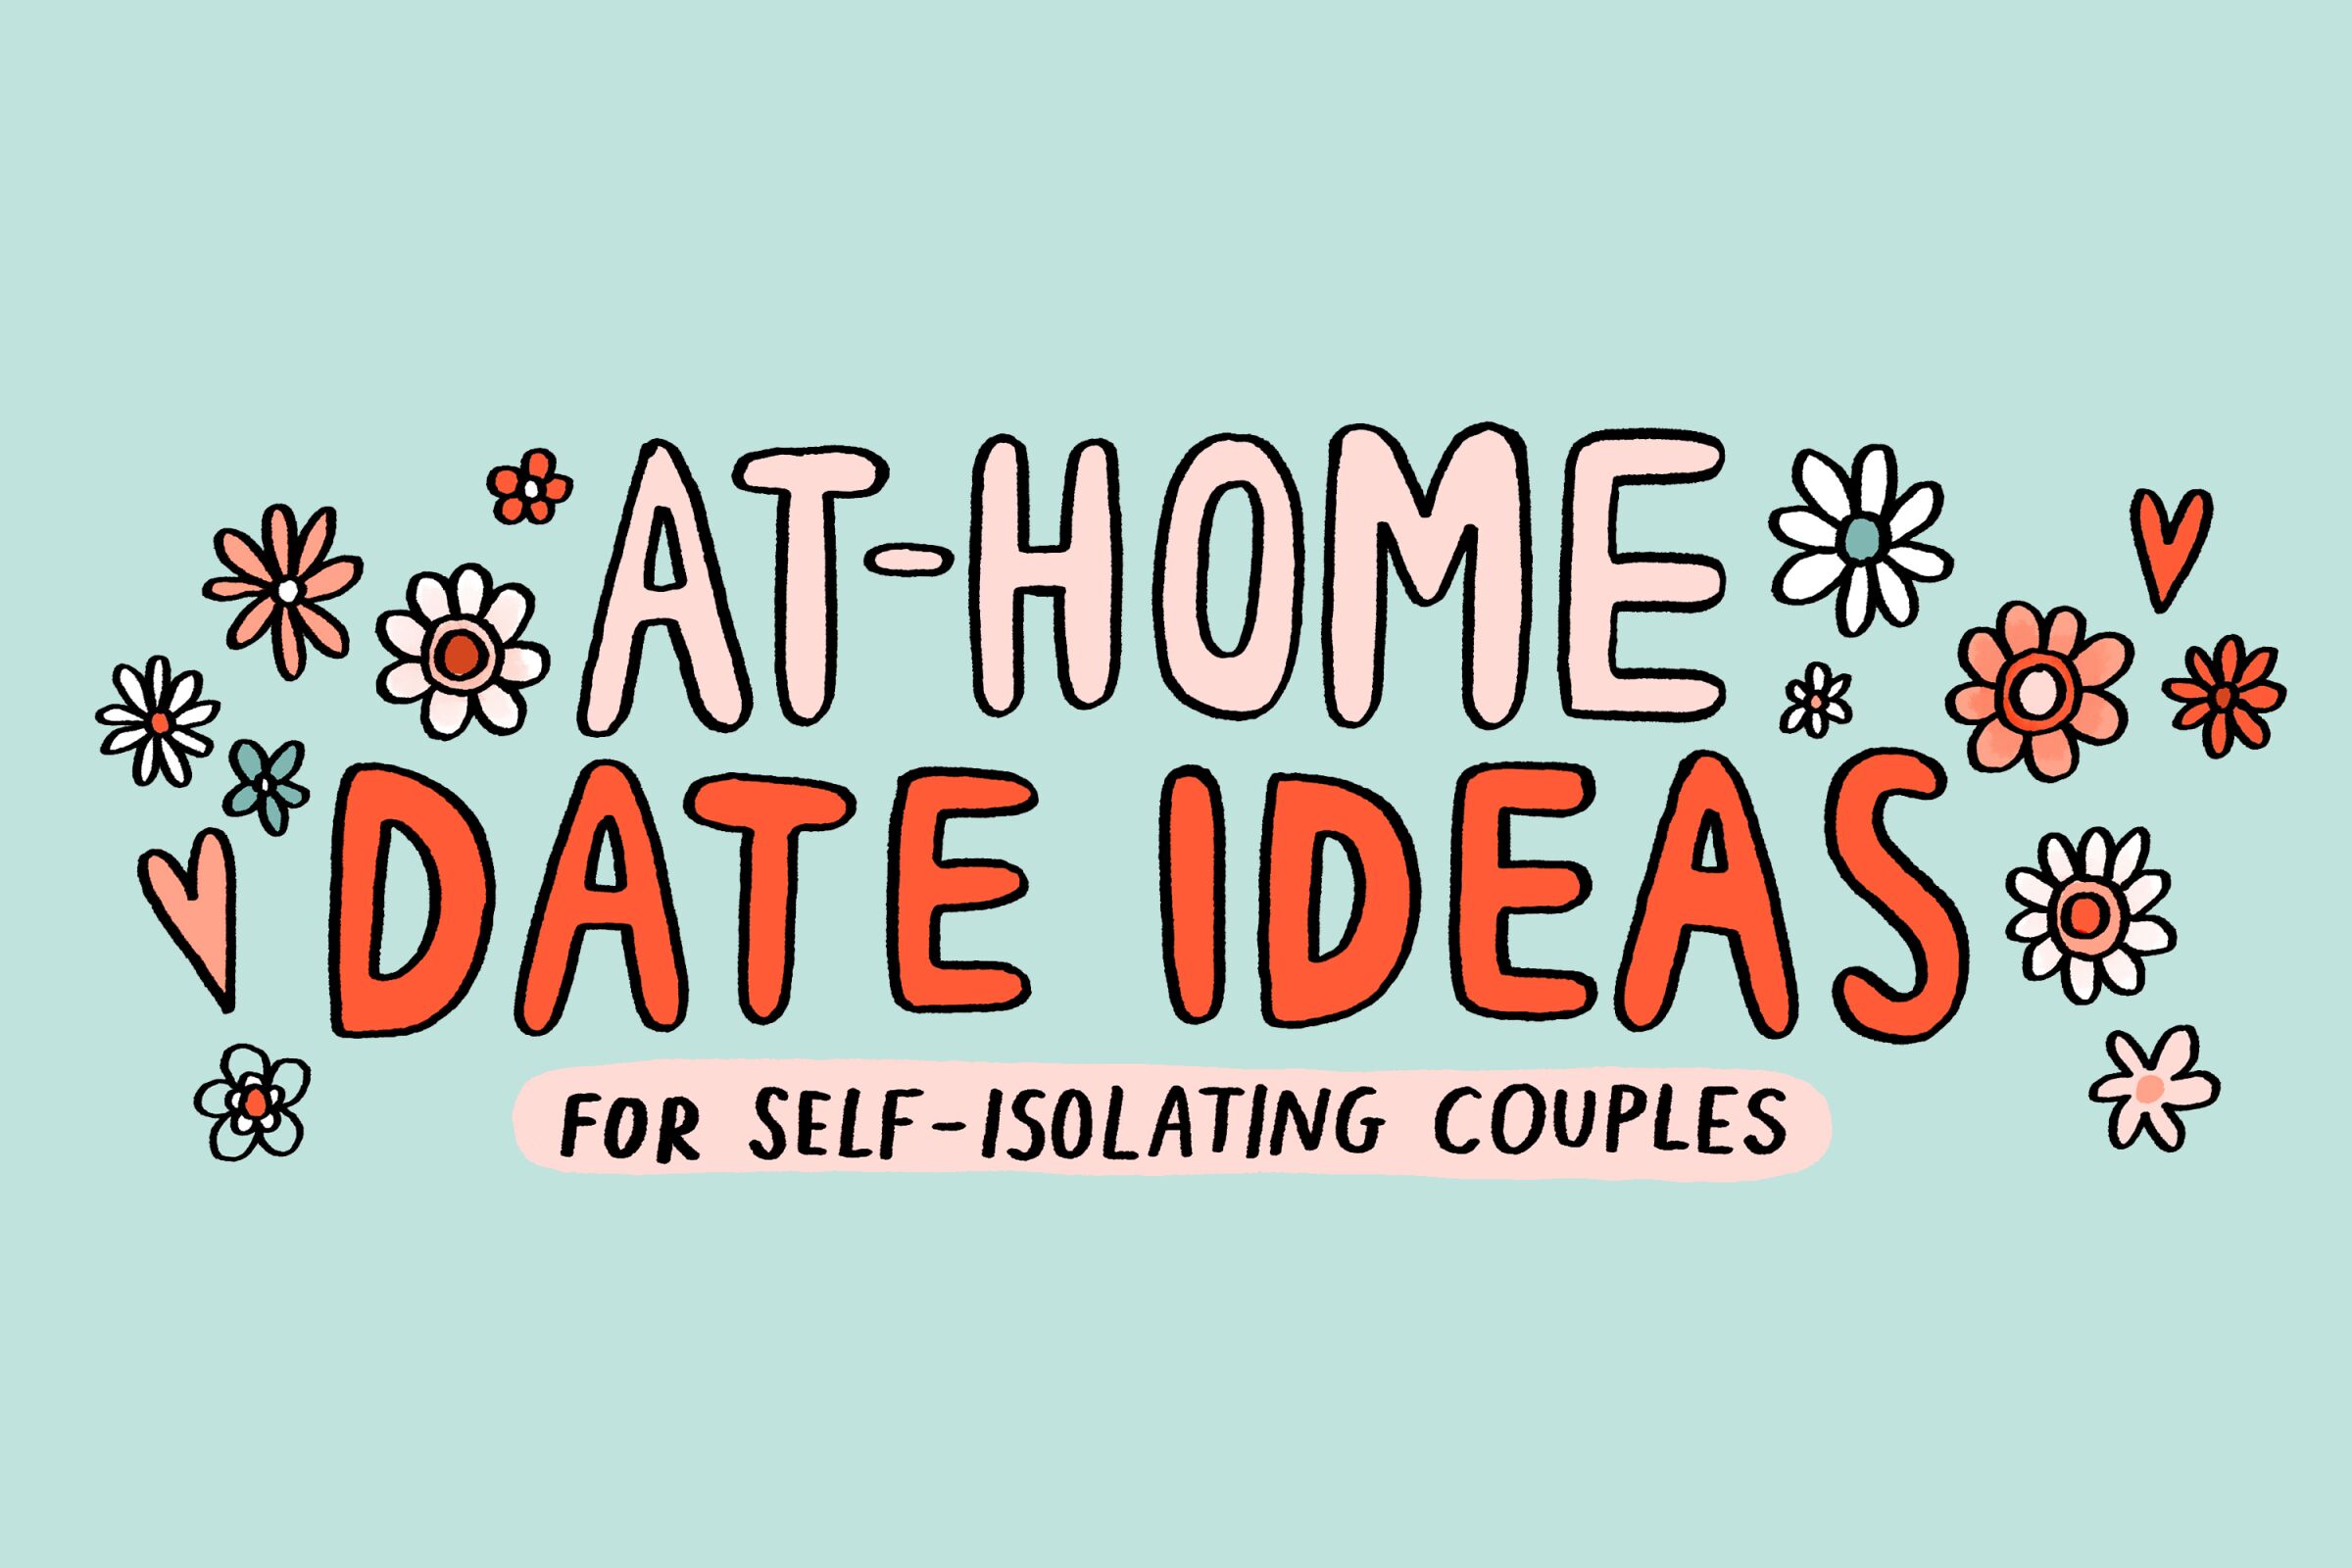 At-home date ideas